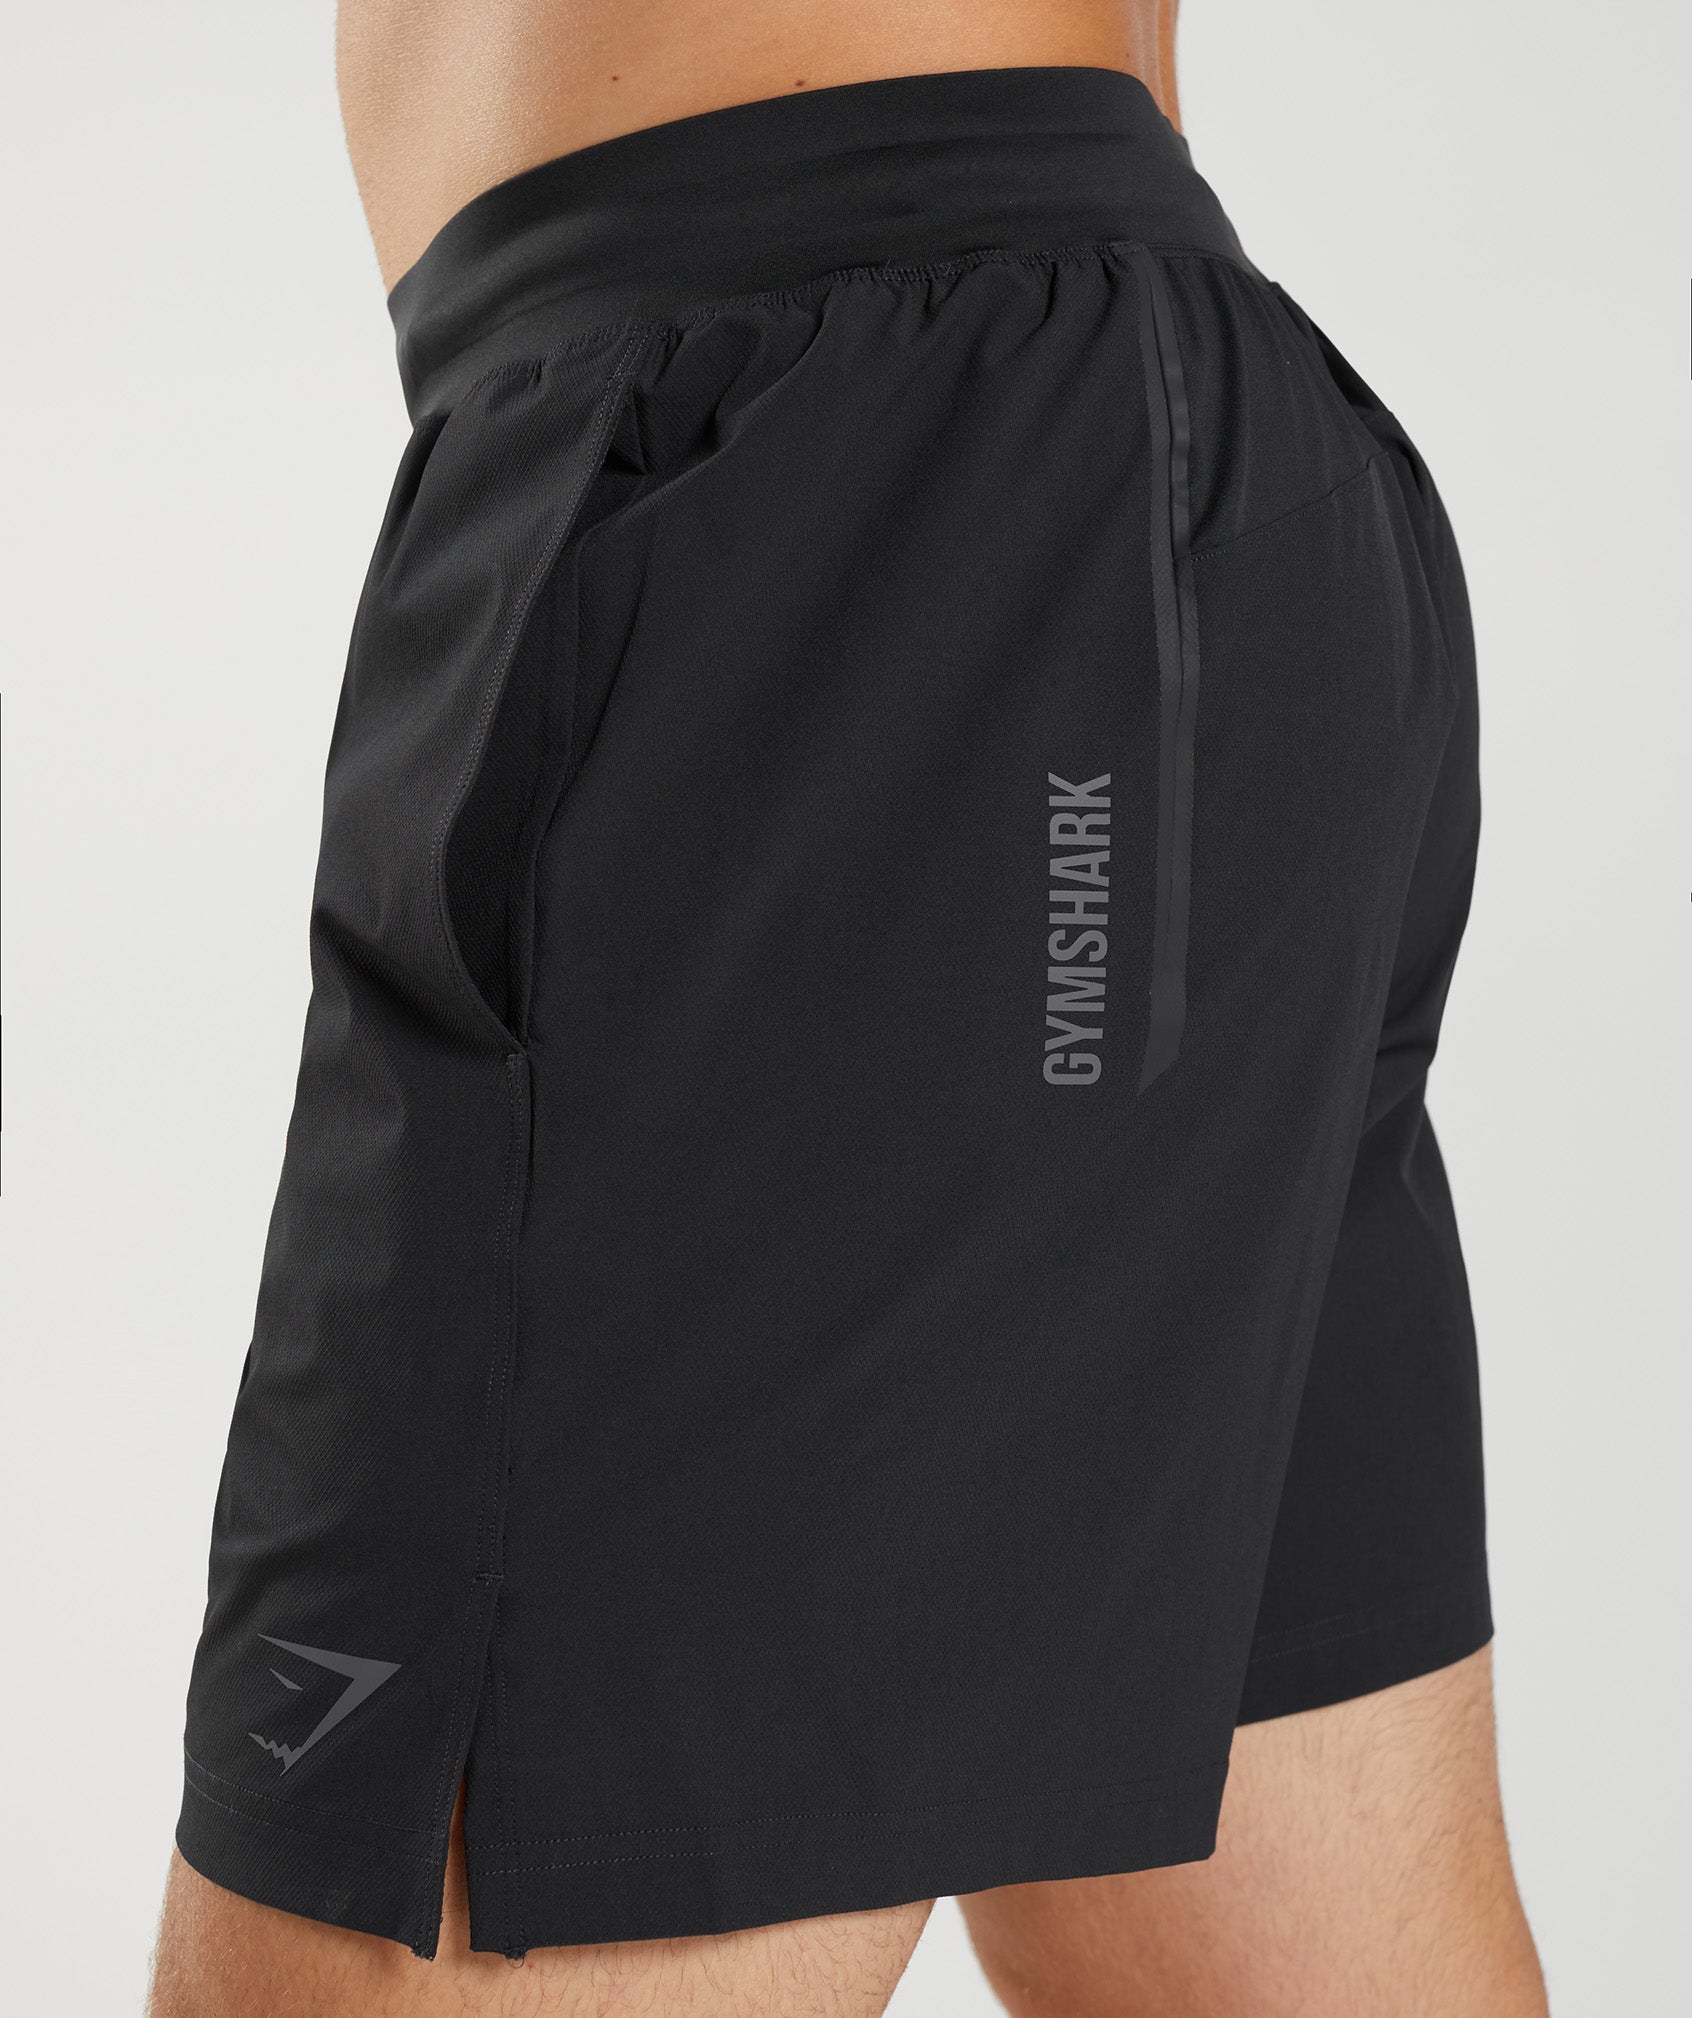 Apex 8" Function Shorts in Black